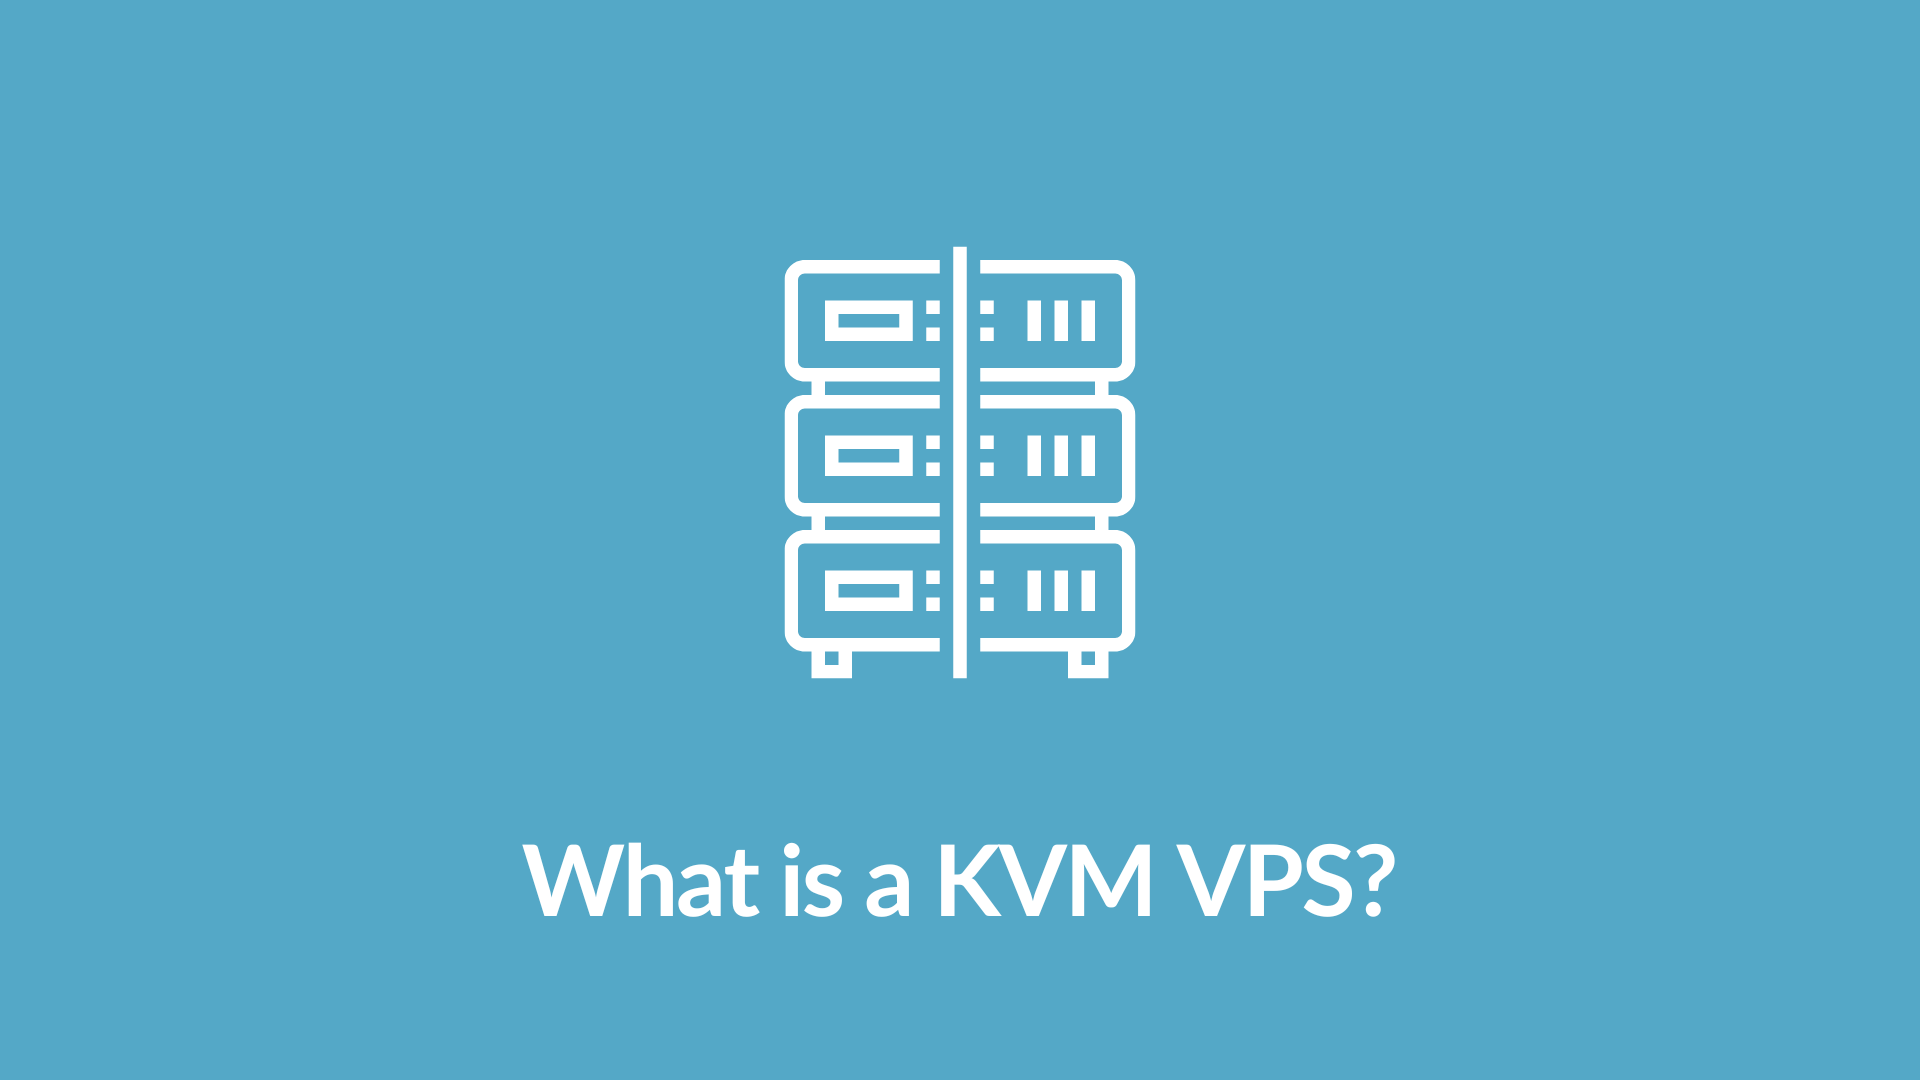 What is KVM?